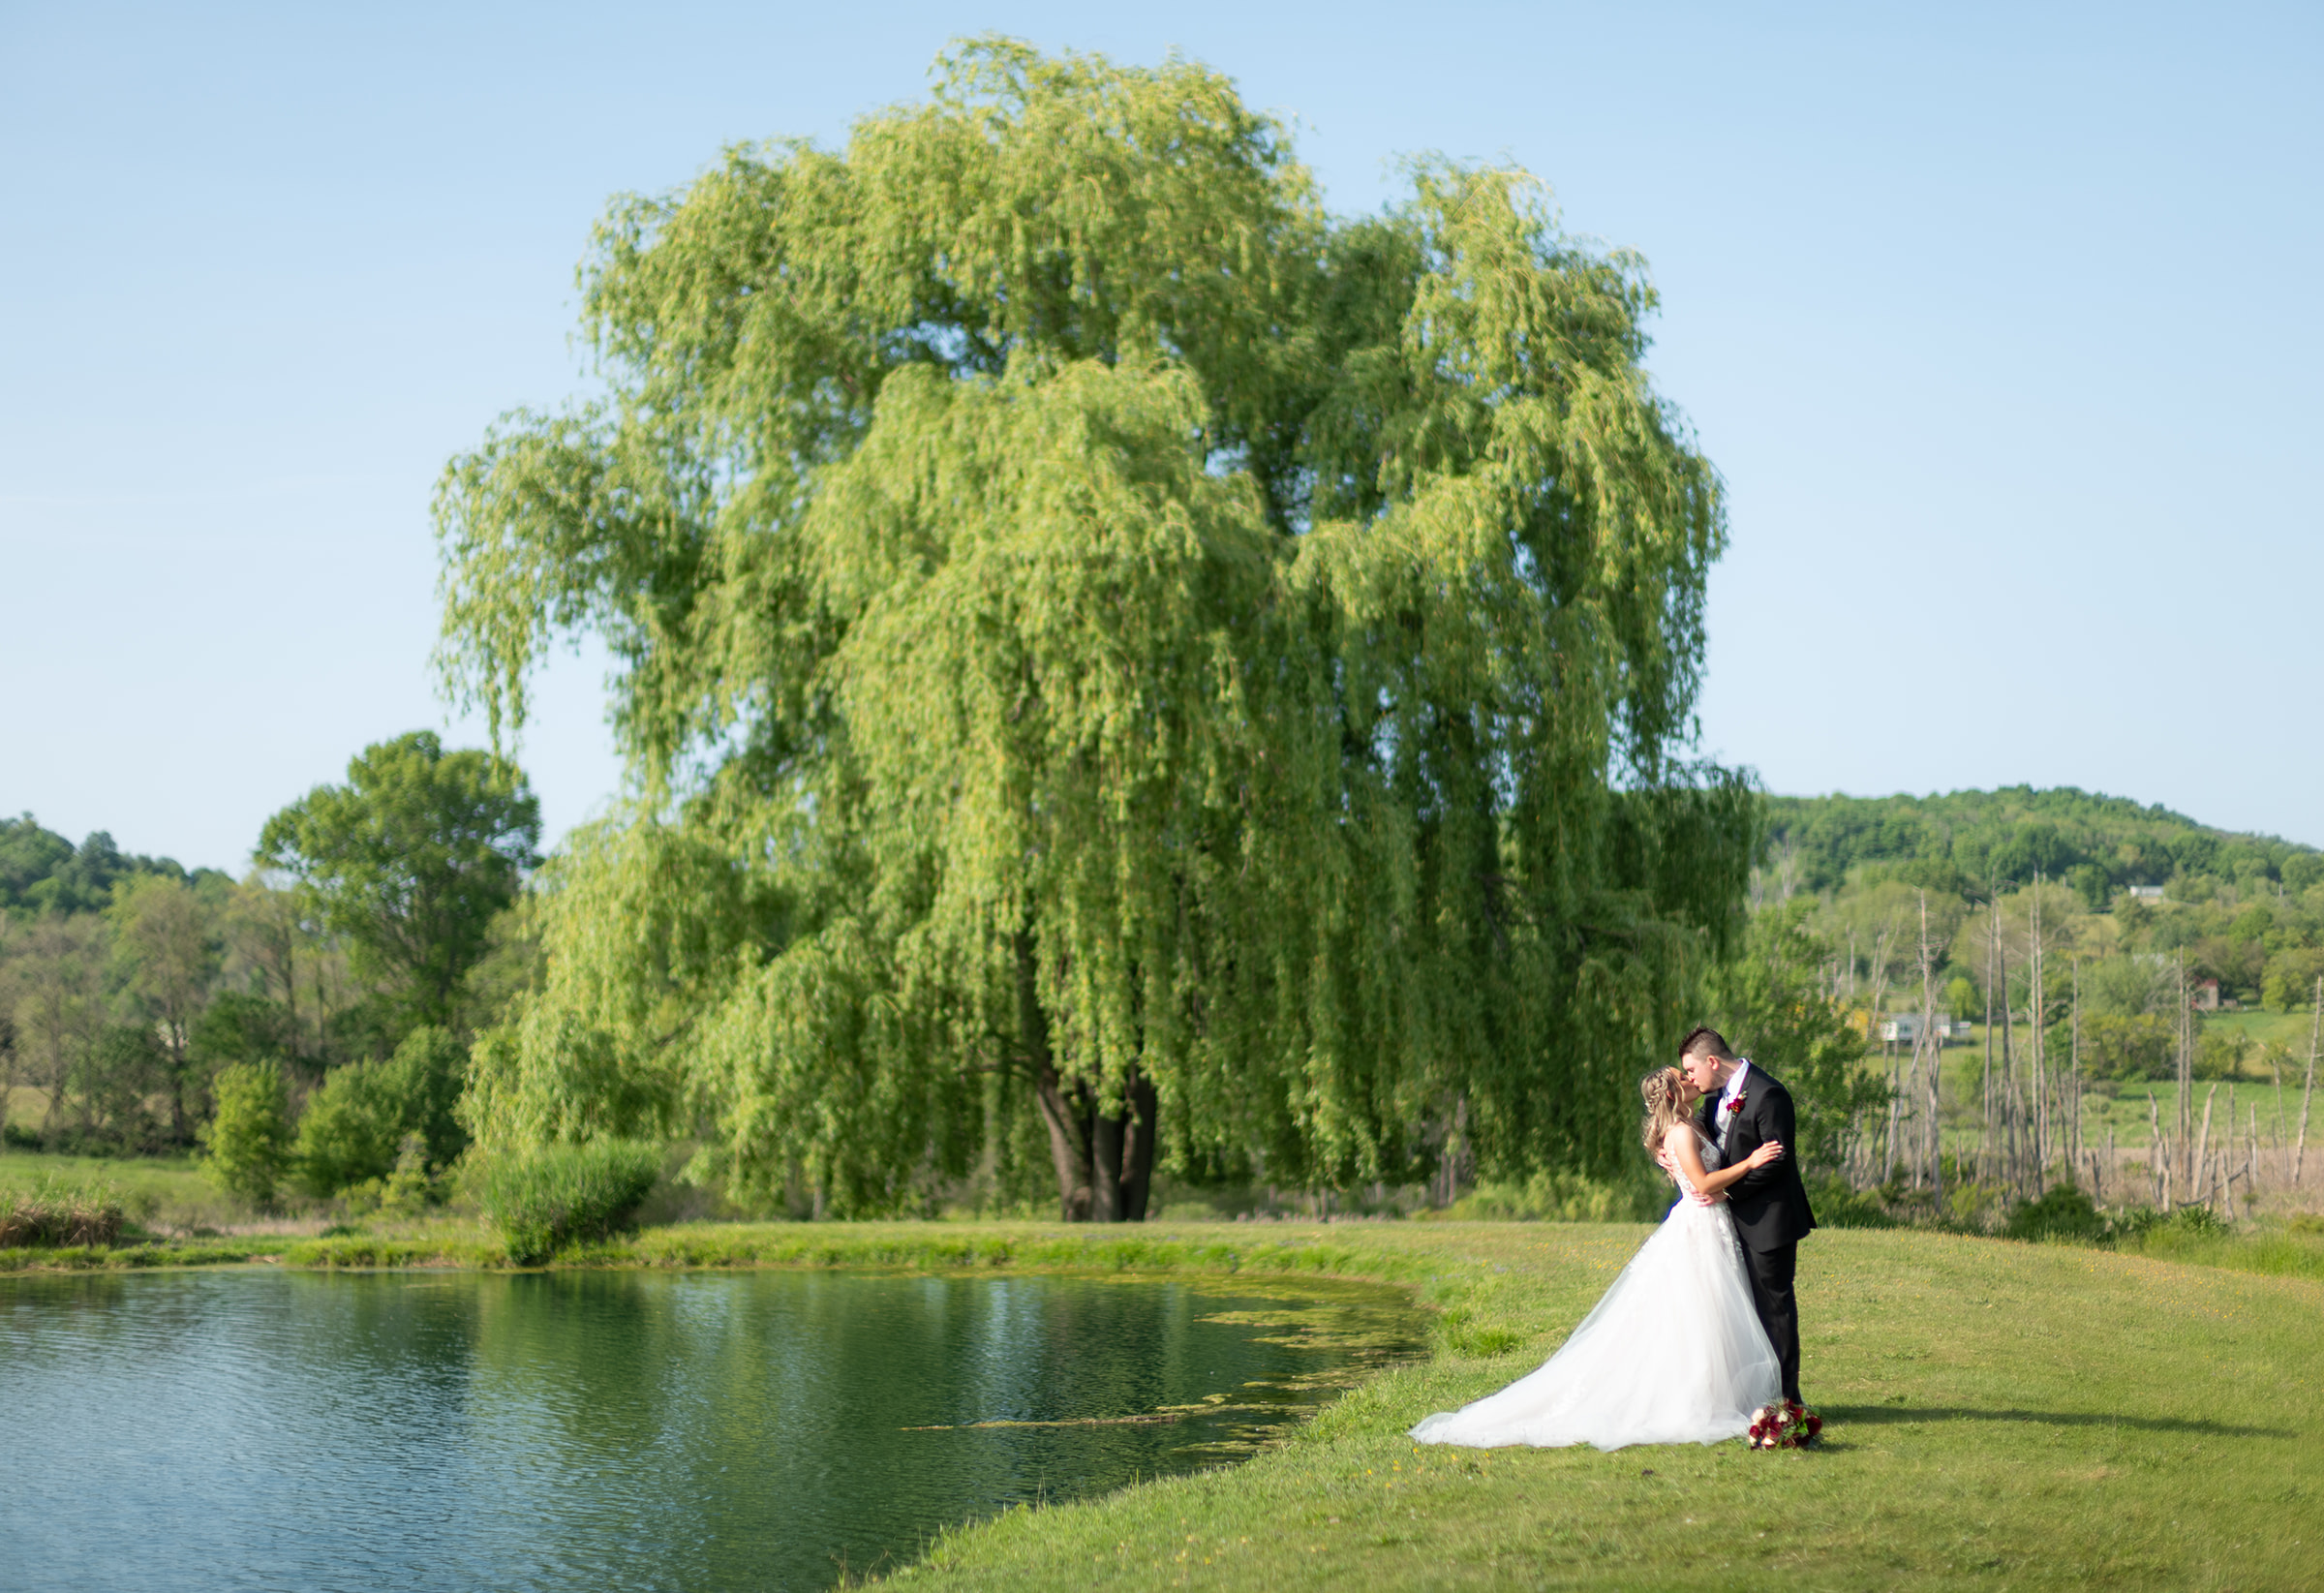 Couple kisses in front of weeping willow tree by glistening pond